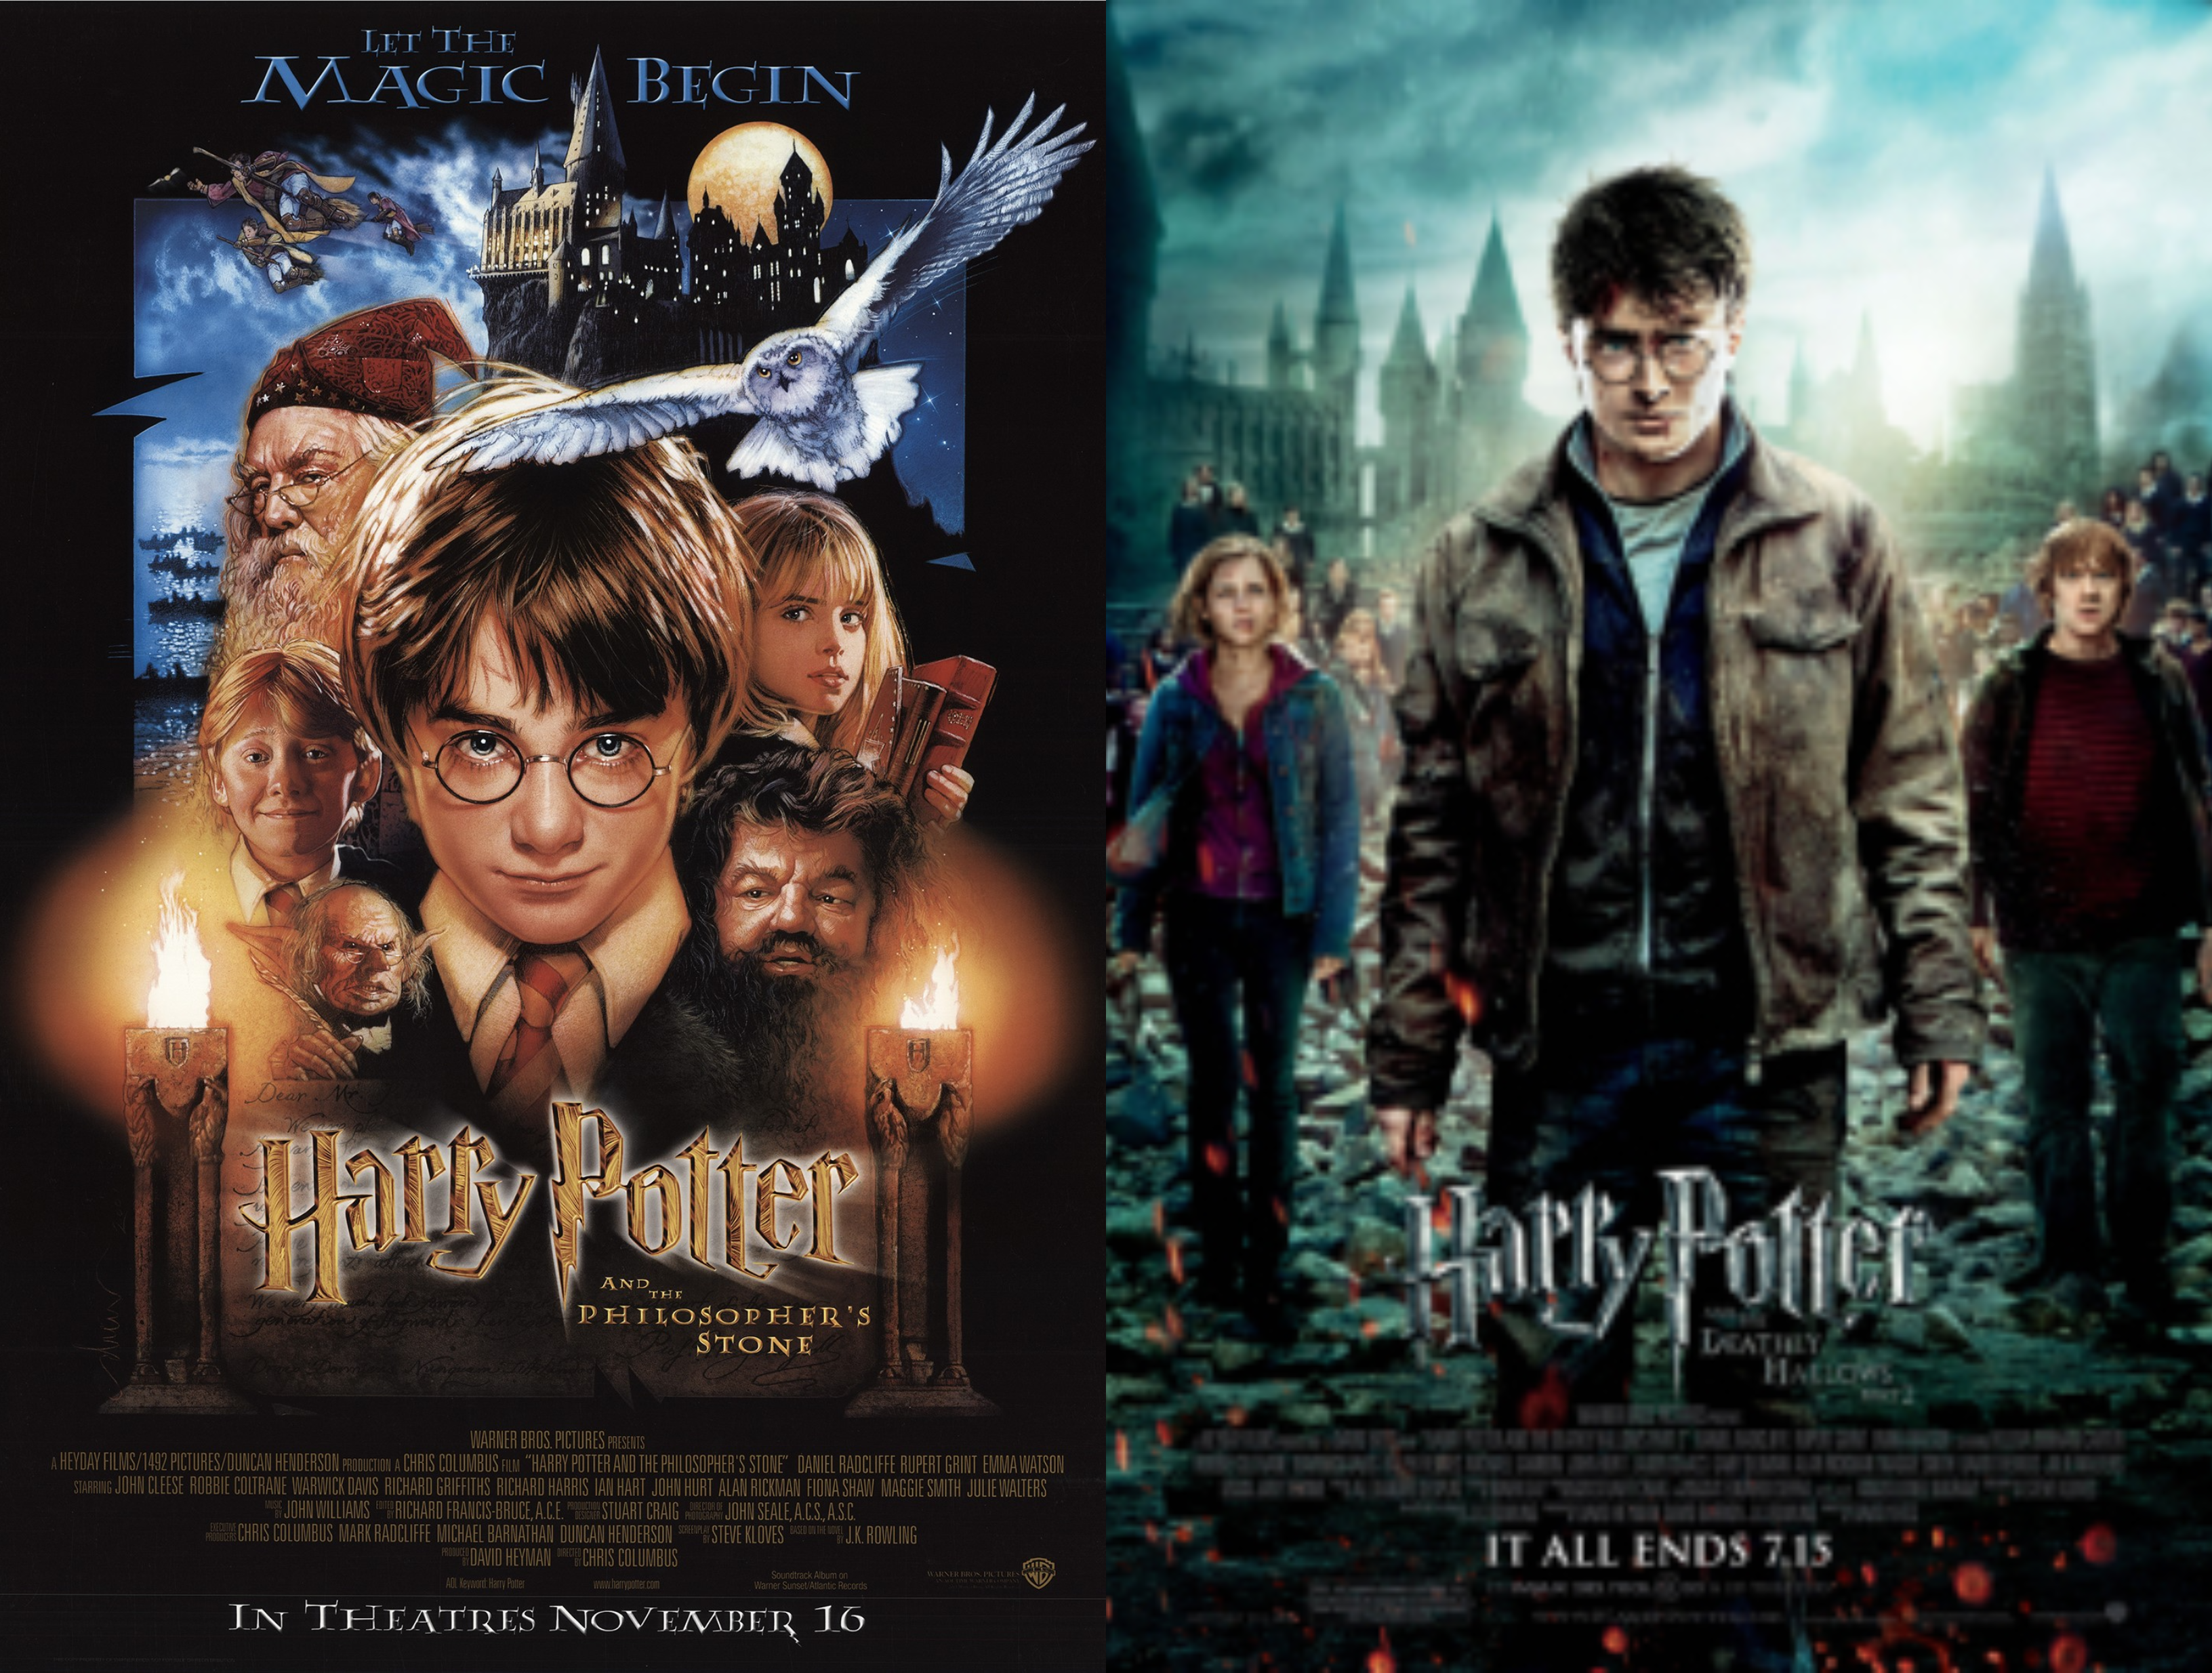 Posters for Harry Potter and the Philosopher's Stone and Harry Potter and the Deathly Hallows part 2